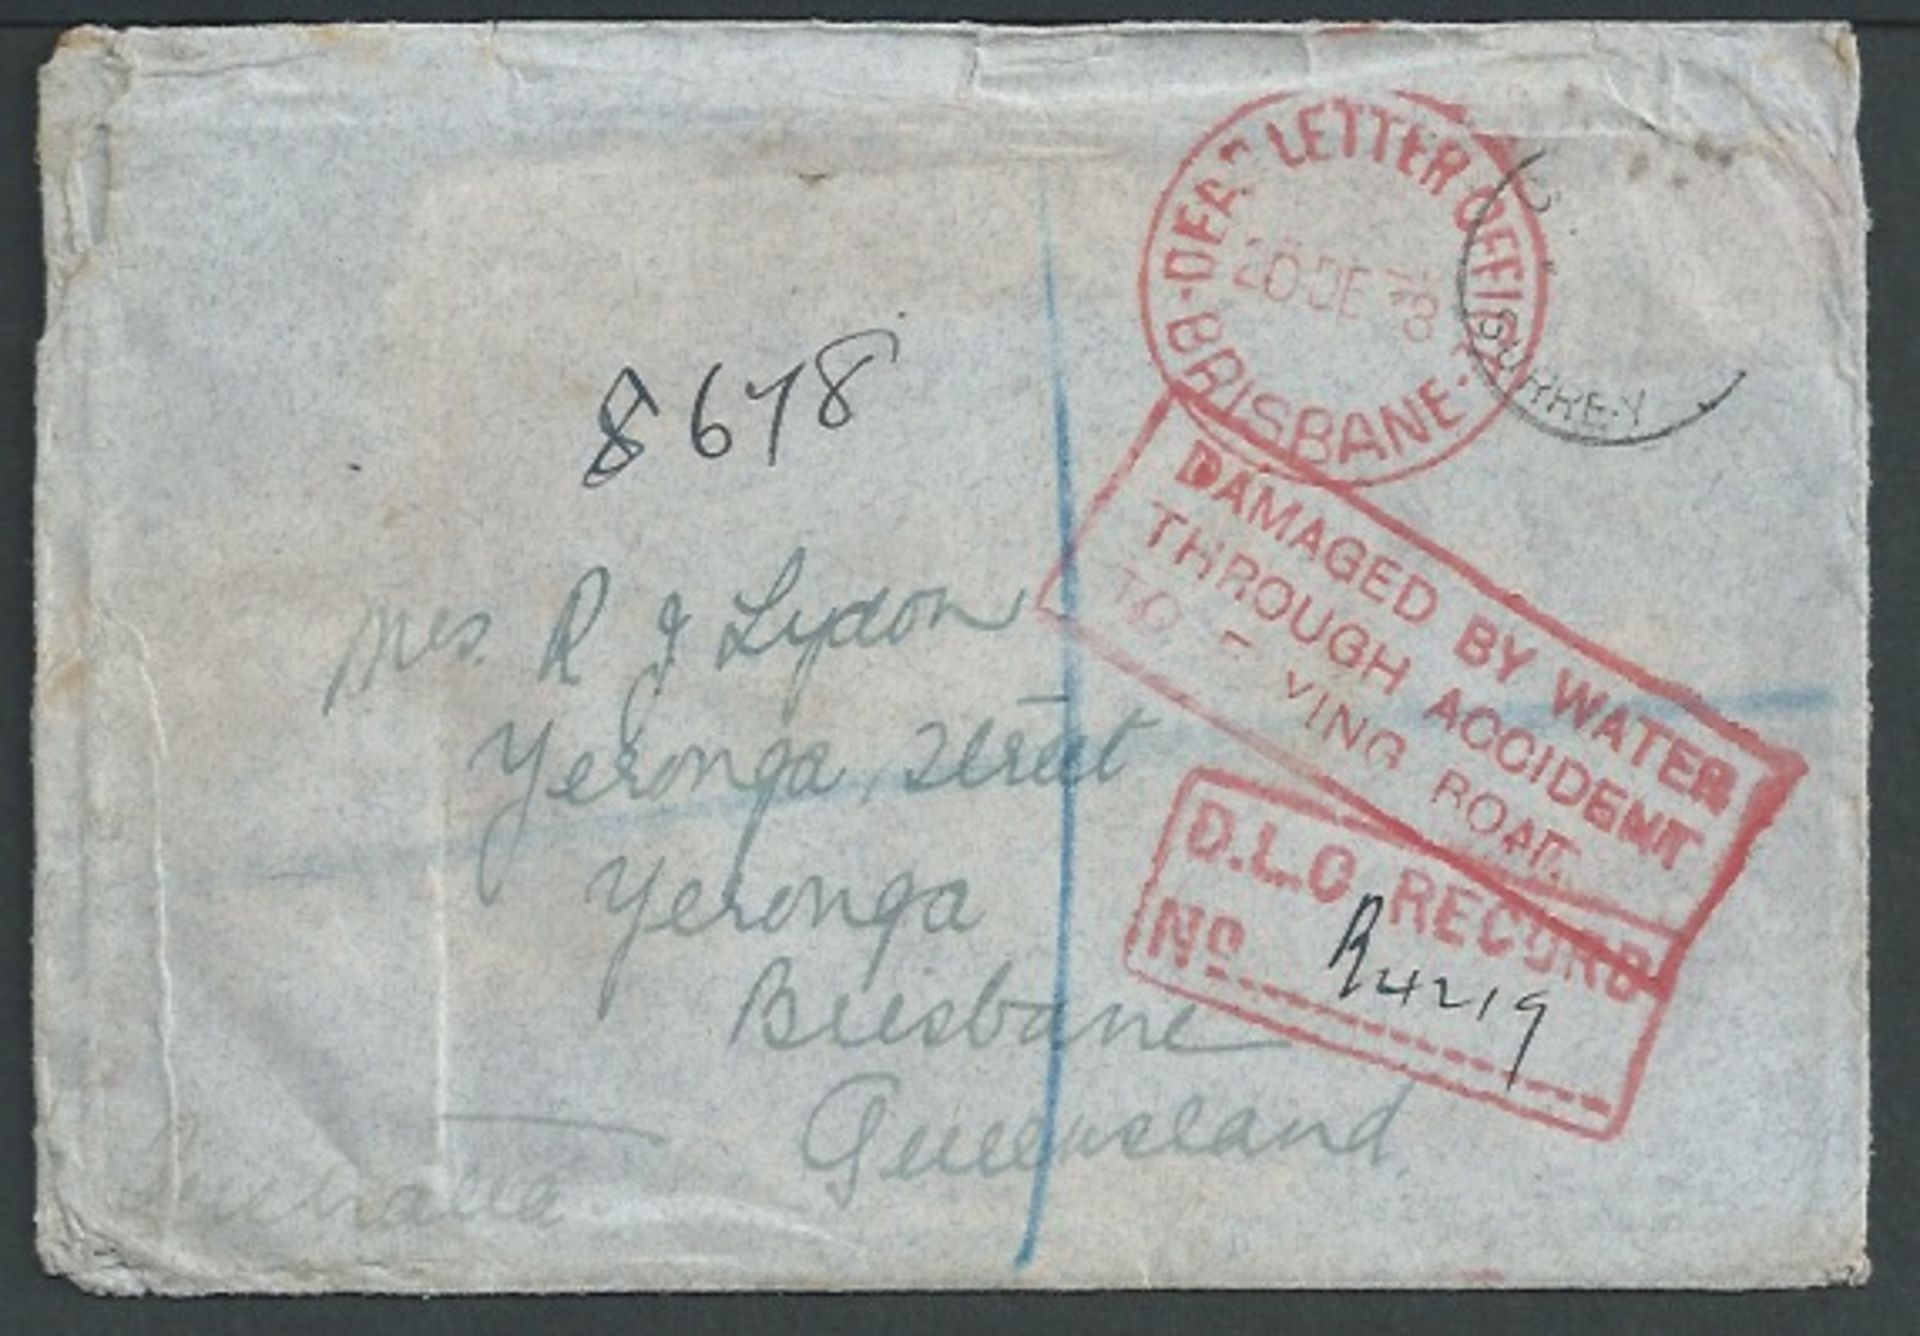 Australia/Crash Mail 1938 (Nov. 23) Registered Cover from England to Australia, recorded from the fl